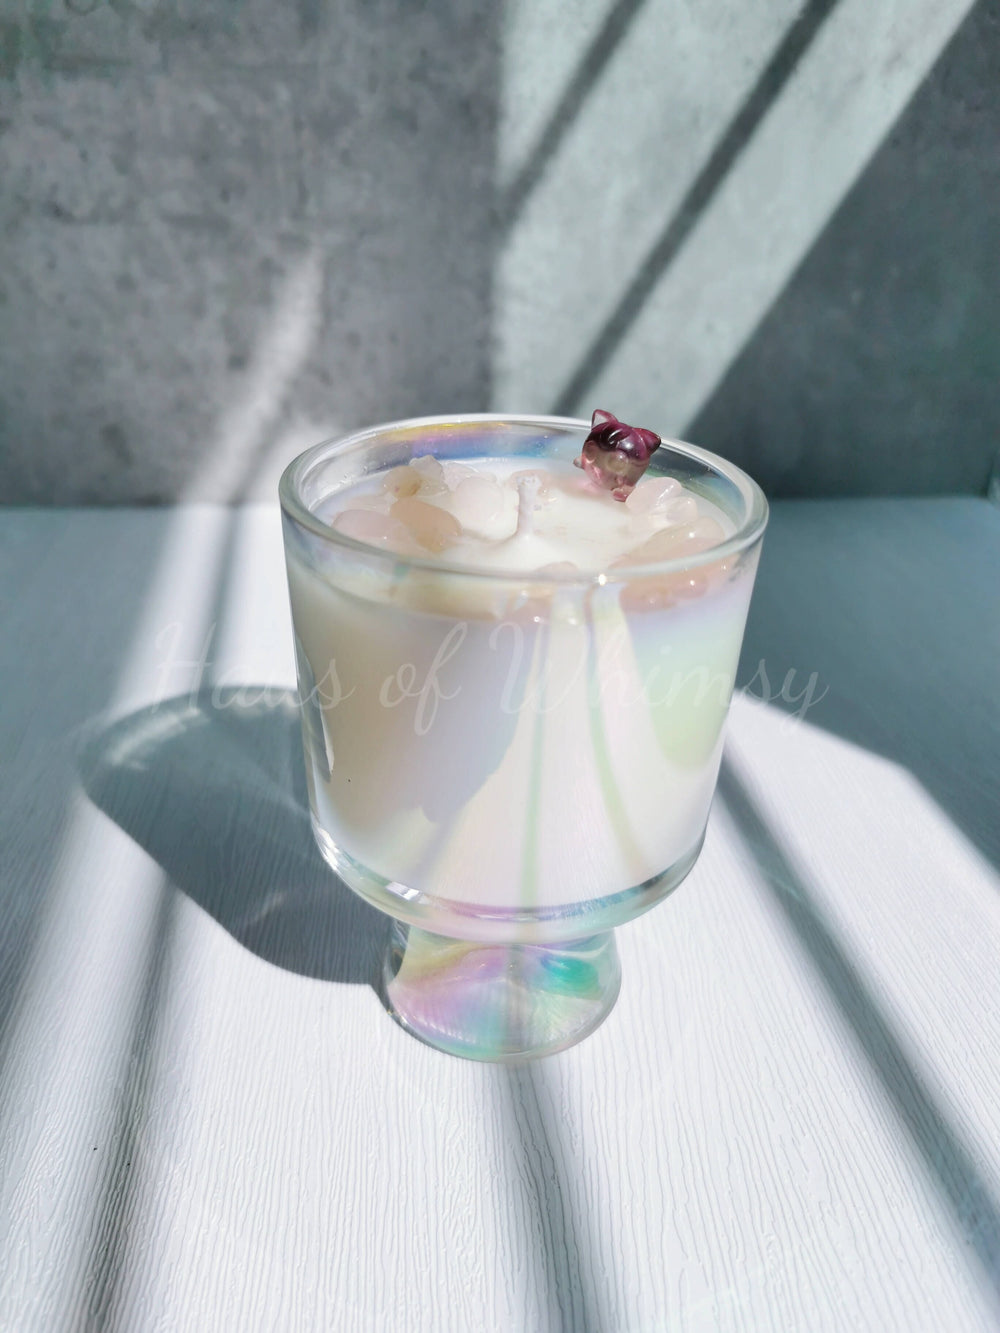 Iridescent crystal infused candle Scented Candles Haus of Whimsy 